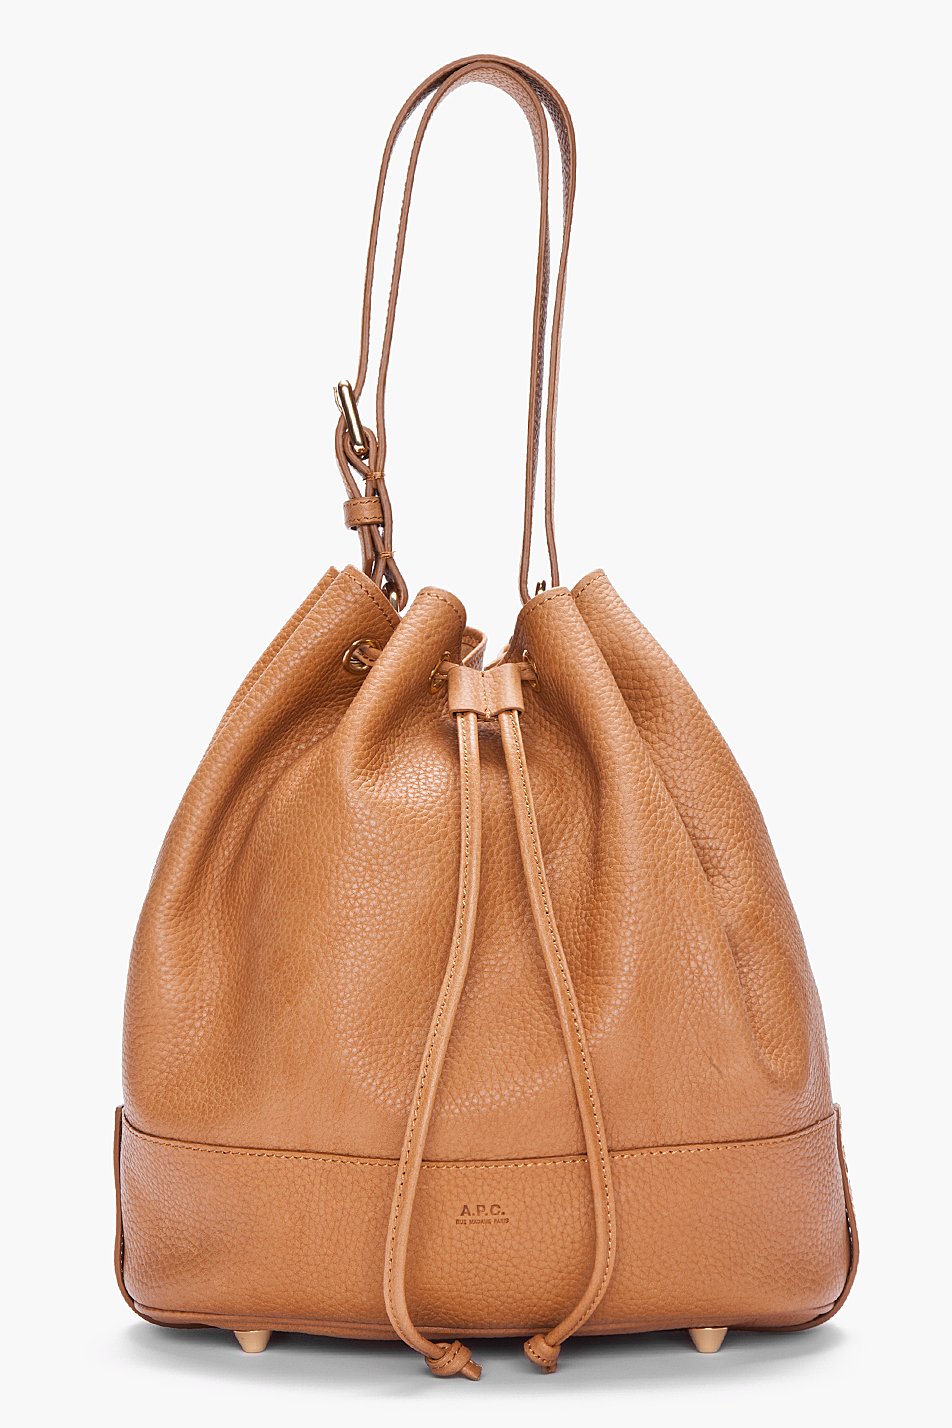 A.p.c. Brown Pebbled Leather Bucket Bag in Brown | Lyst